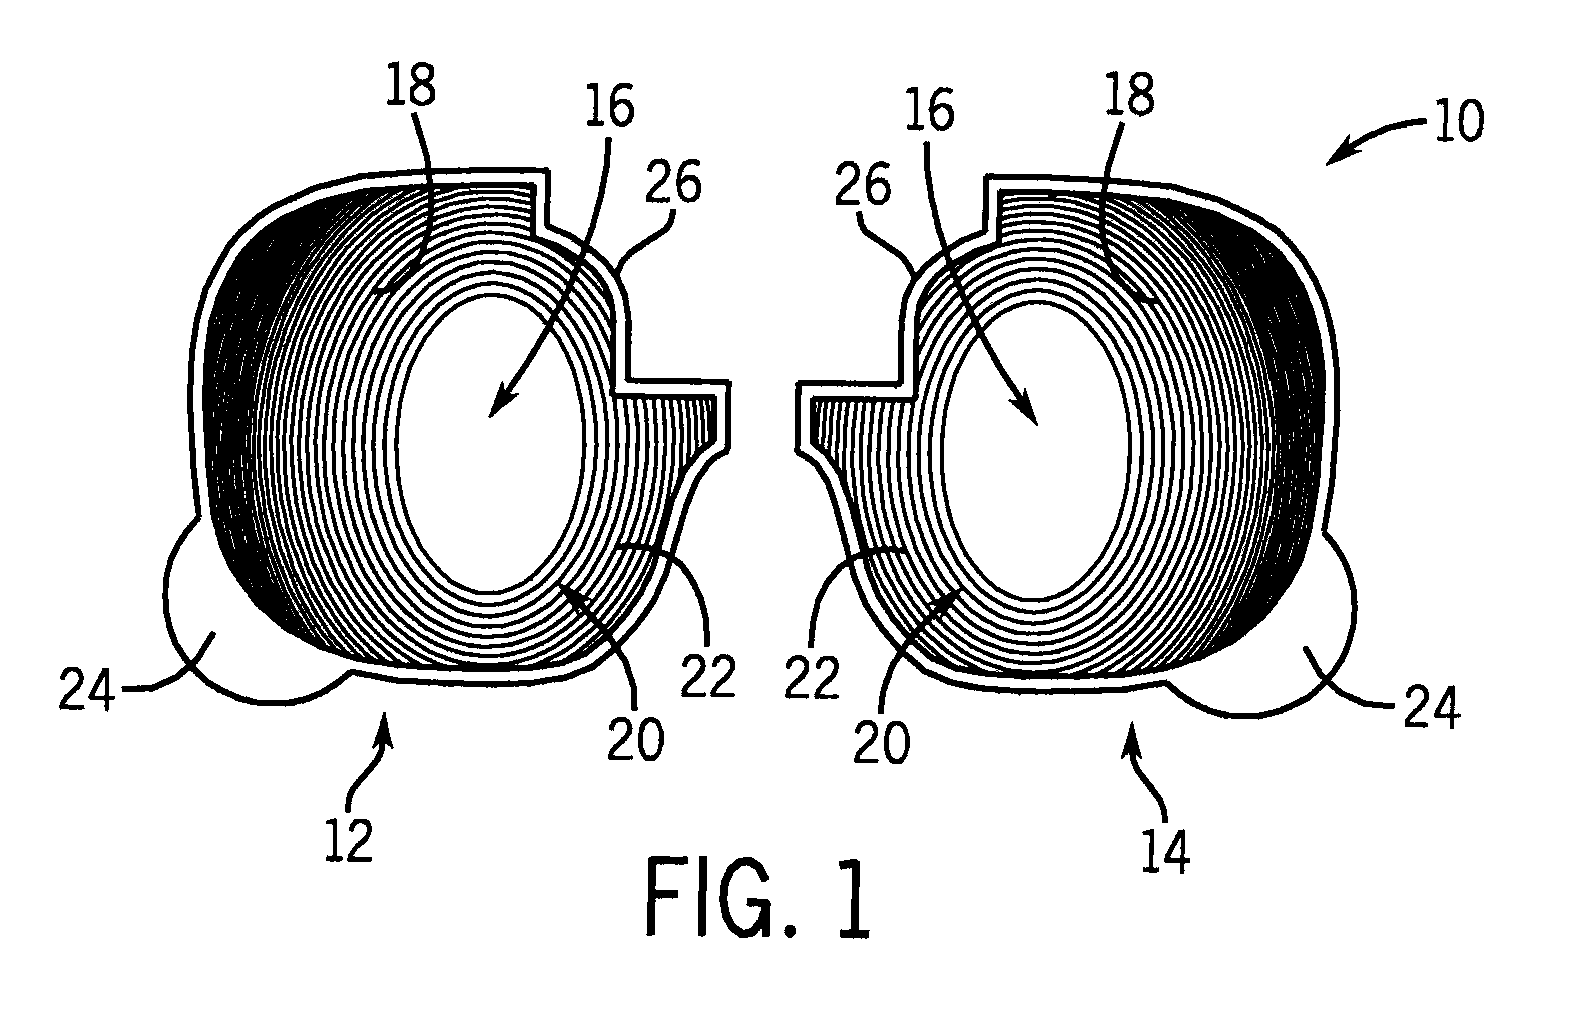 Viewing device for simulating impairment and reducing peripheral vision